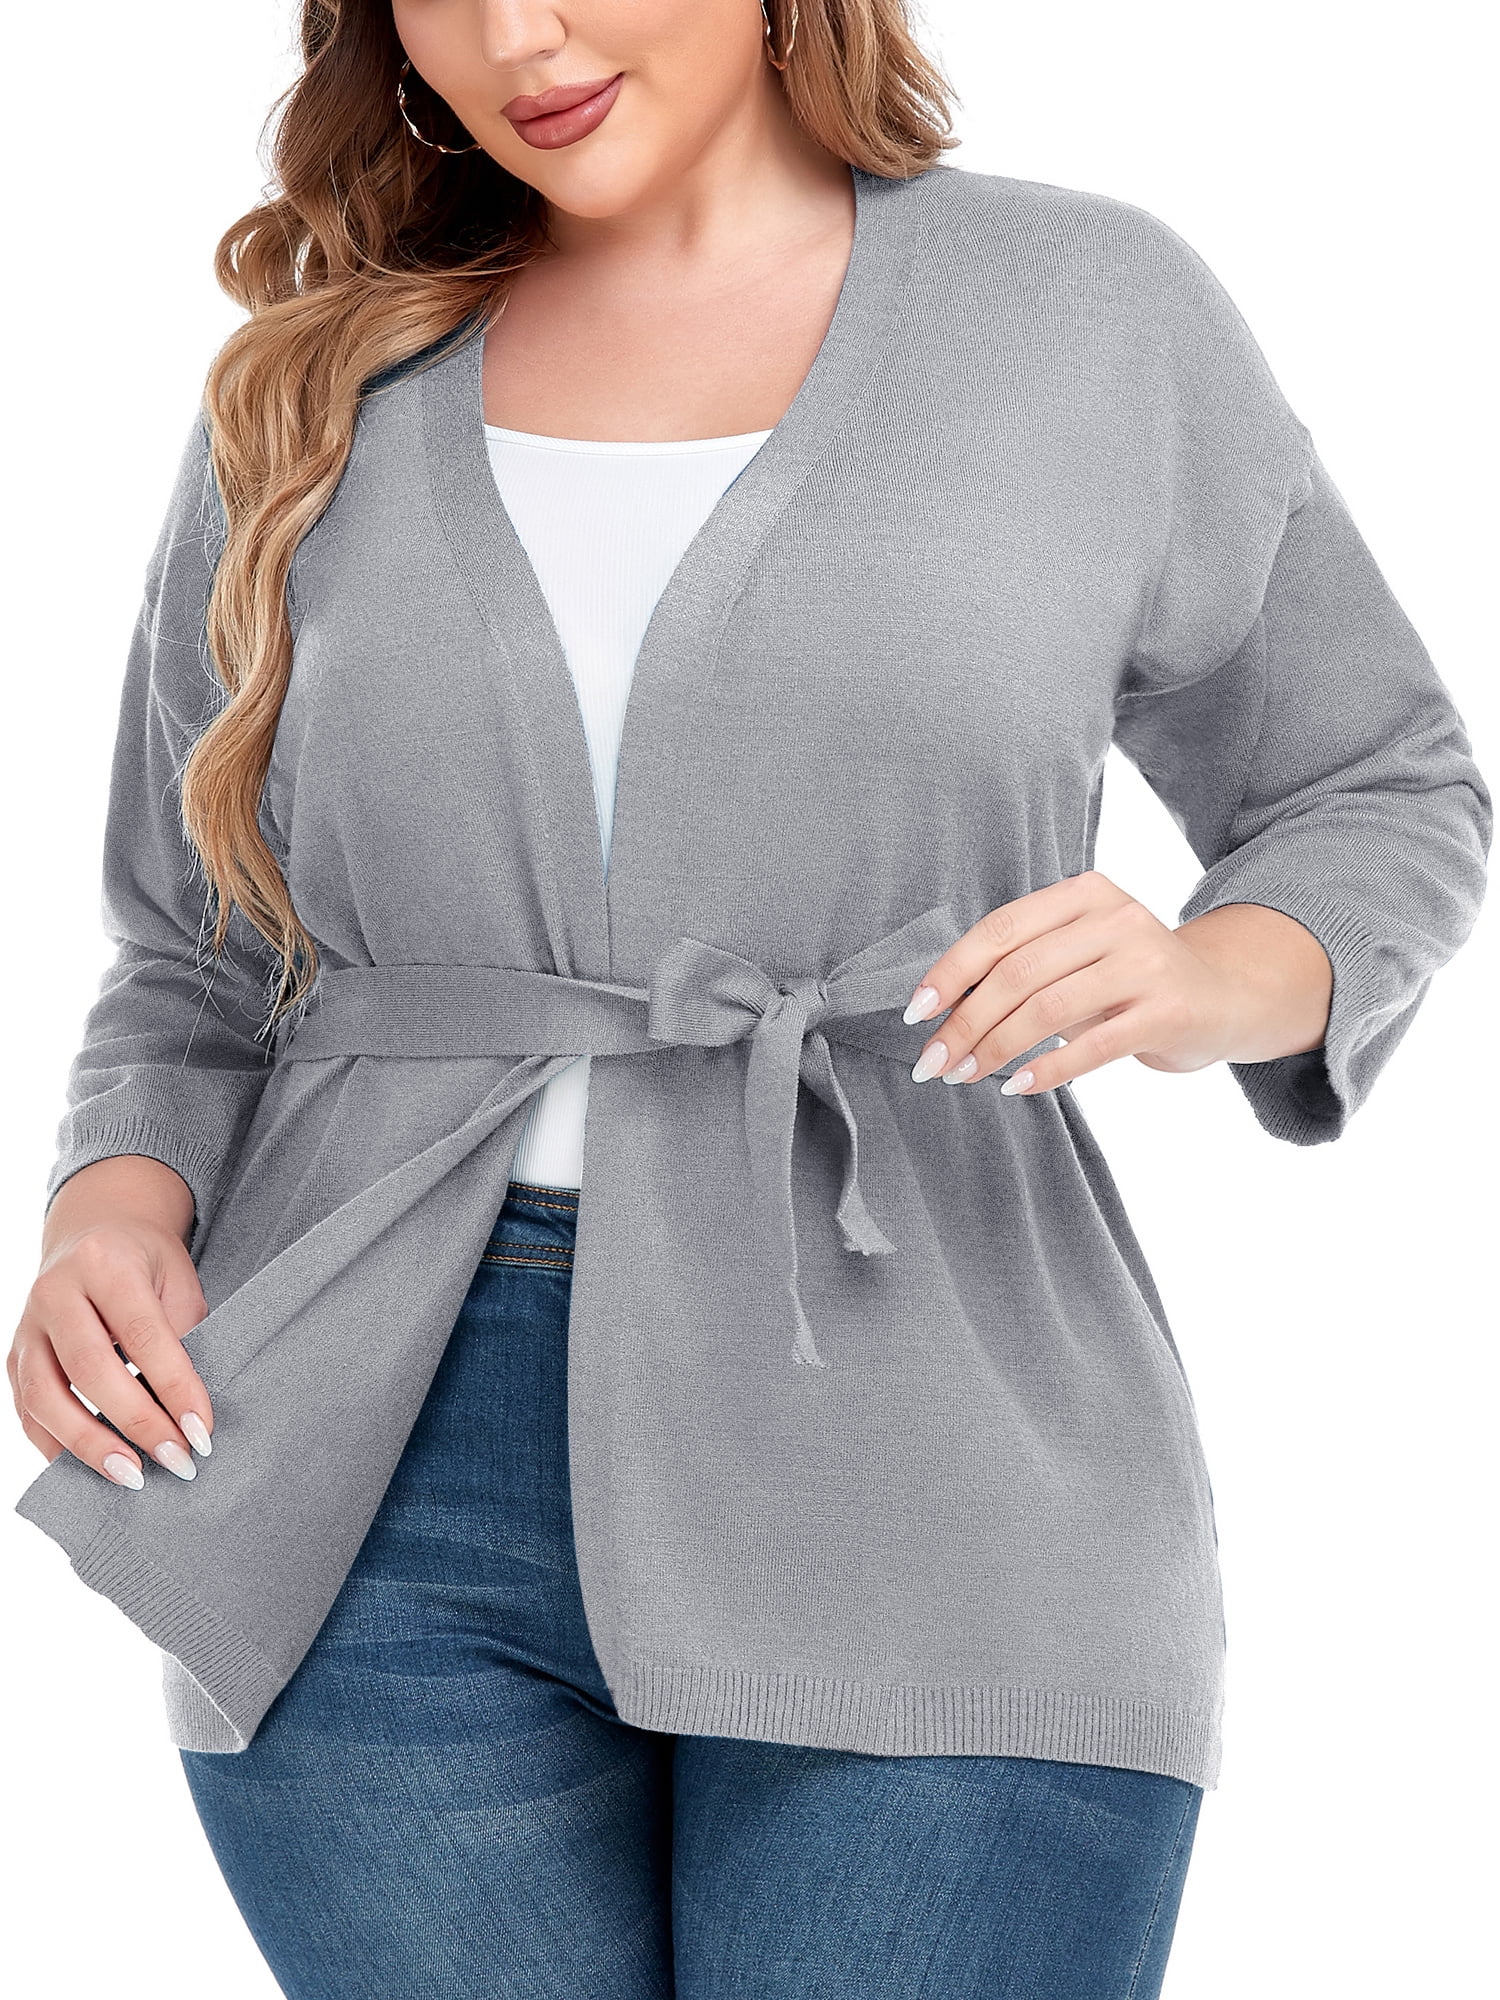 uhnmki Womens Plus Size Tops Chunky Knit Open Front Long Sleeve Tight Short  Cardigan Outerwear T Shirt Plus Size Blouse Dark Gray at  Women's  Clothing store